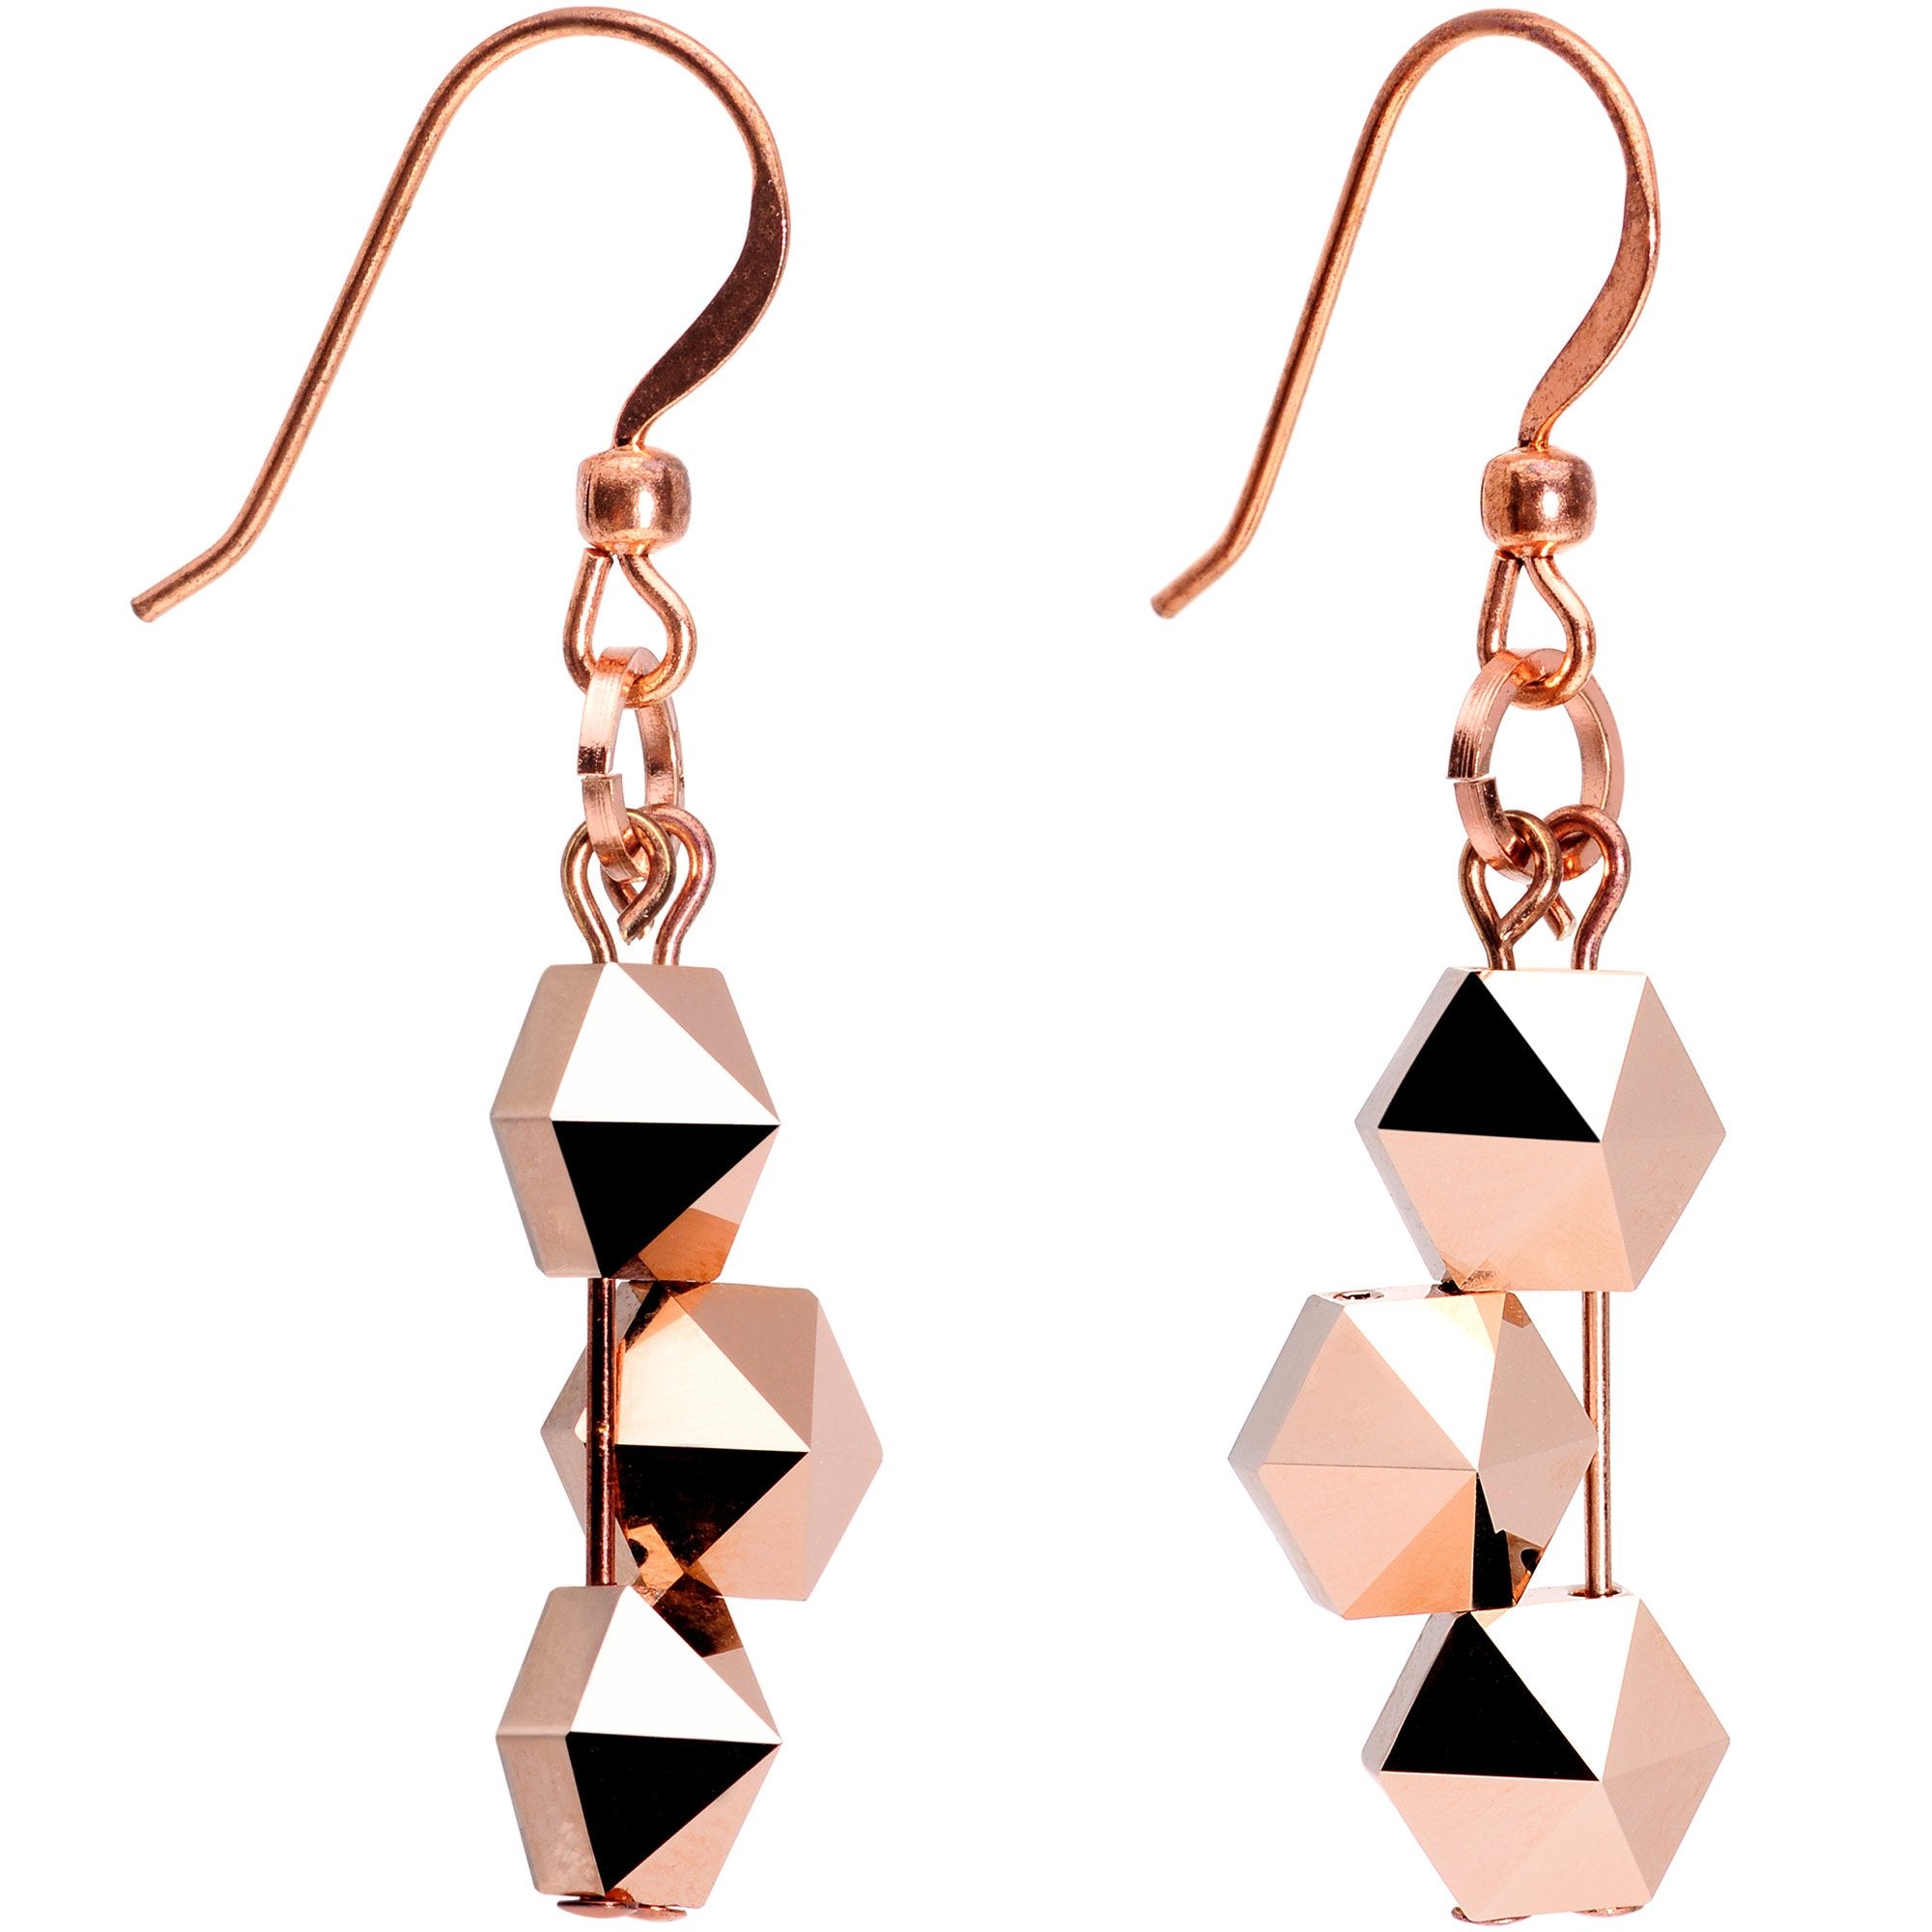 Handmade Blush Pyramid Earrings Created with Crystals